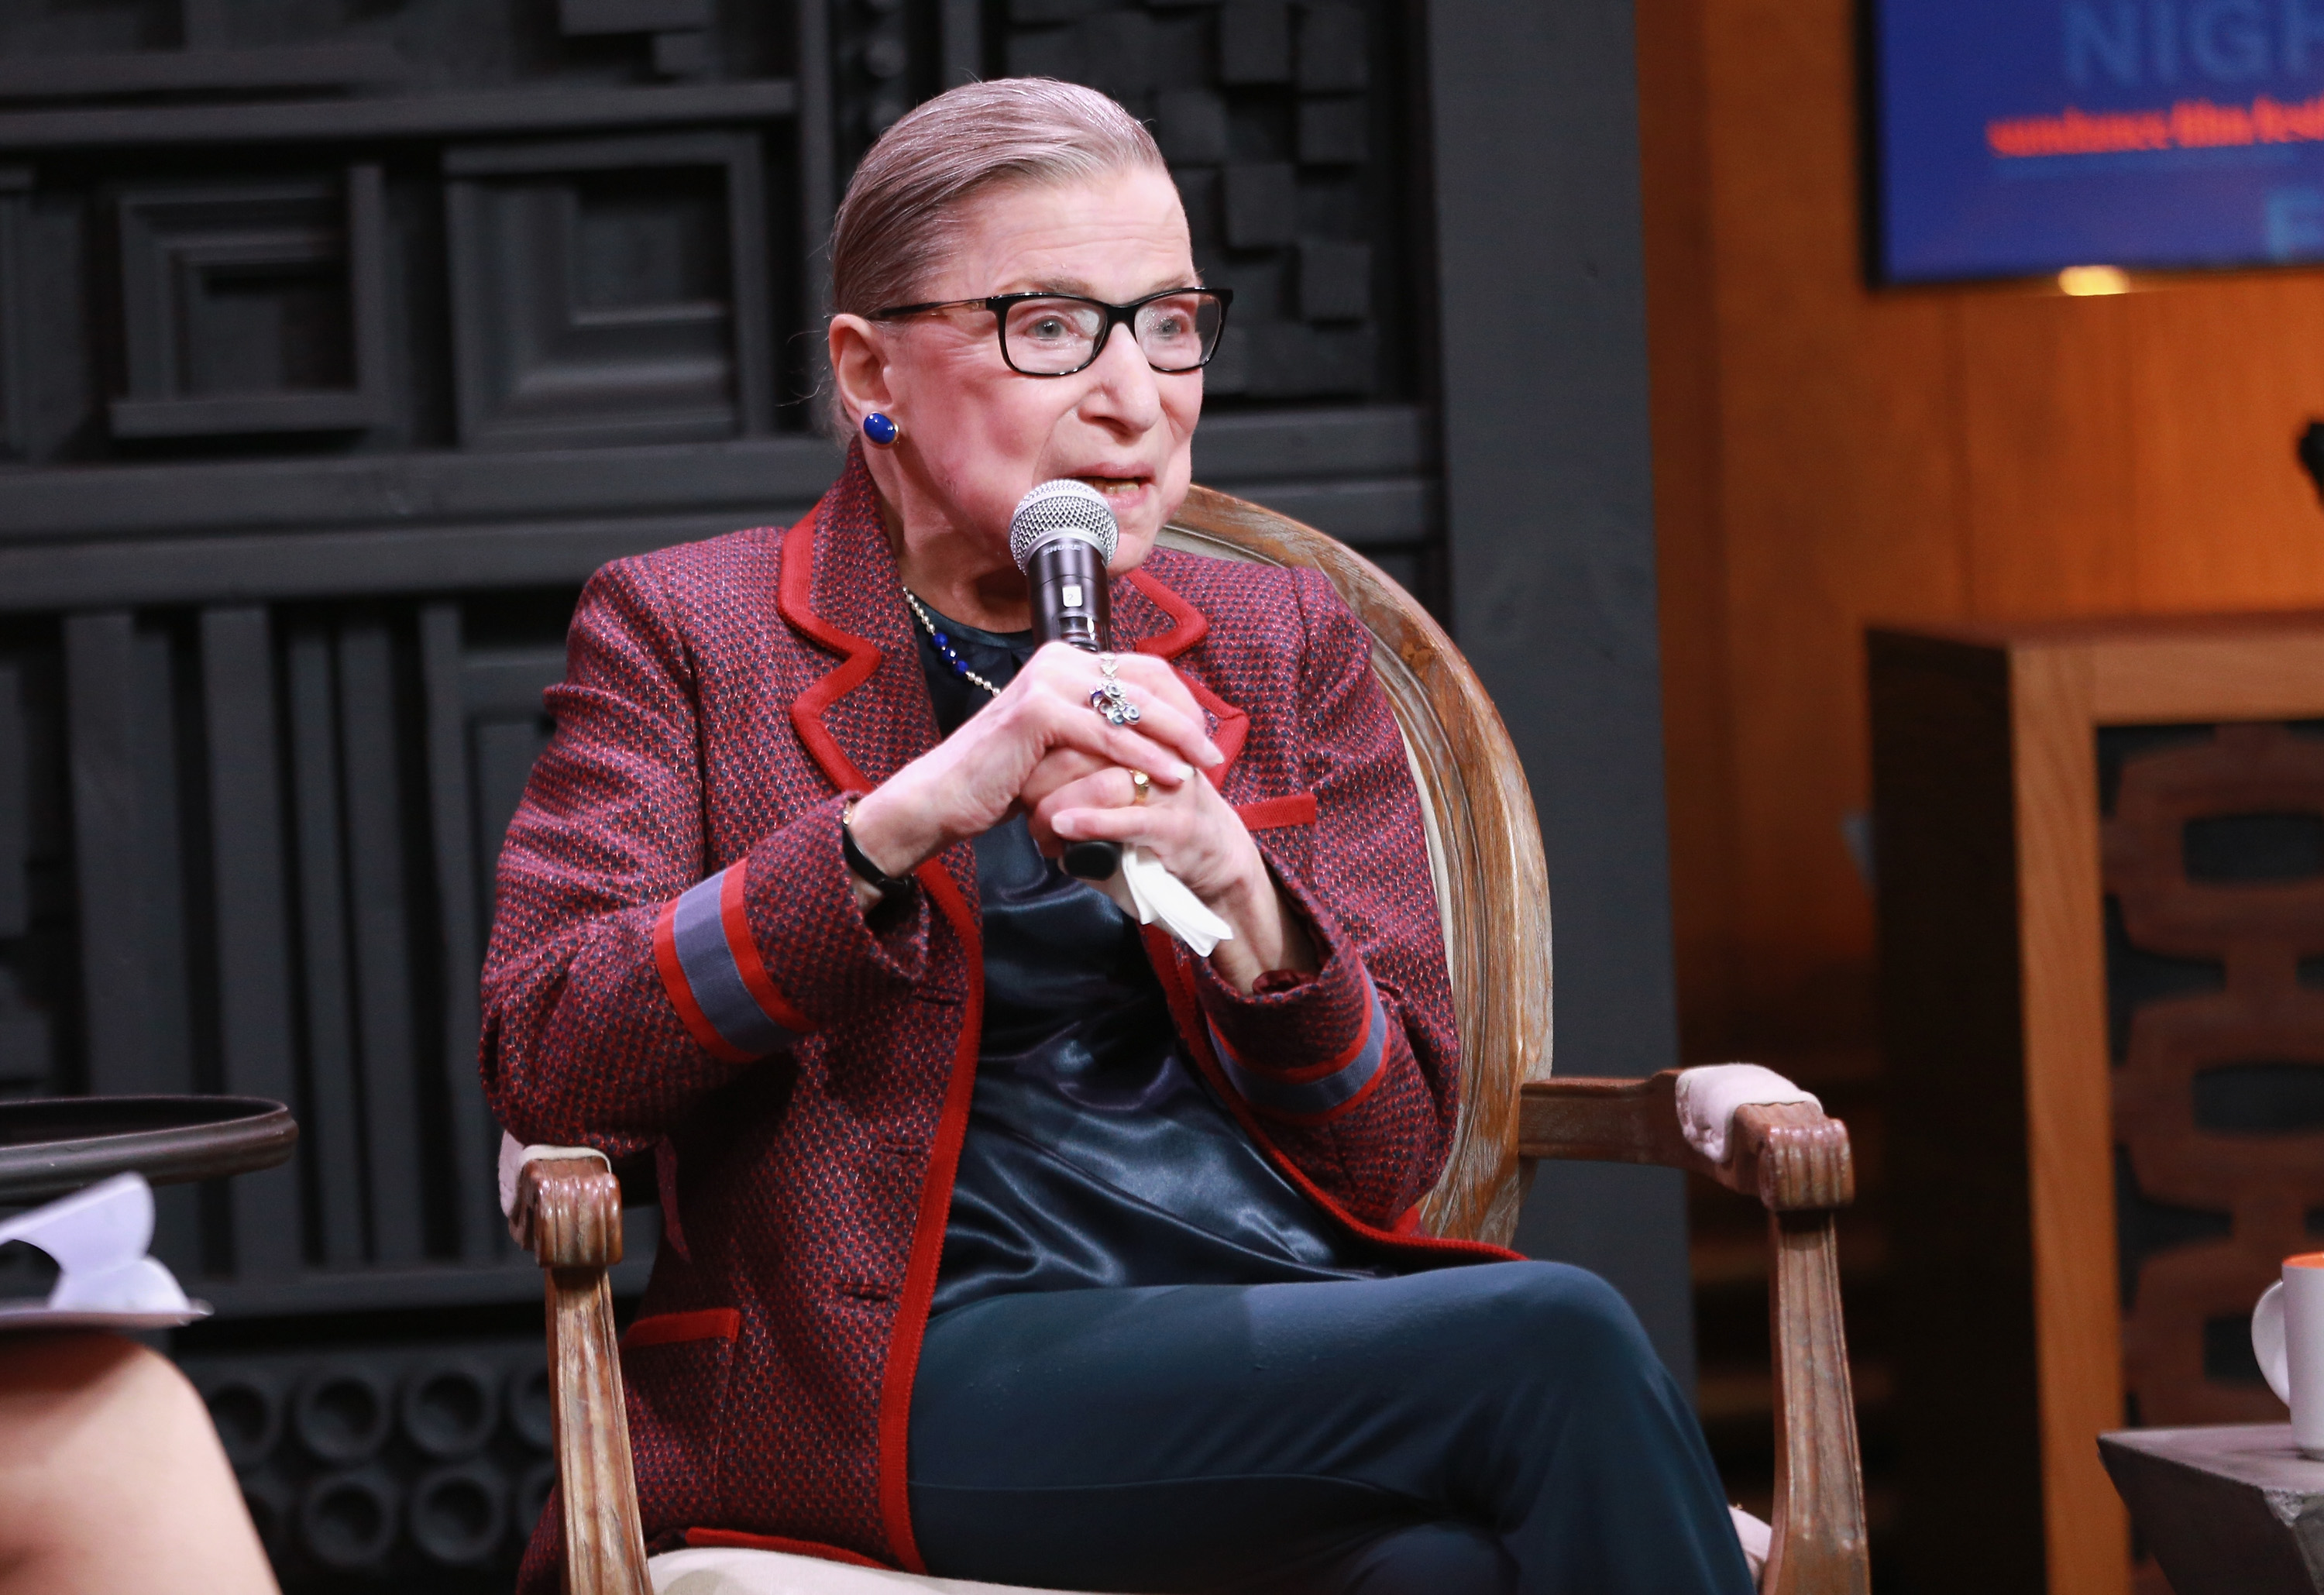 Associate Justice of the Supreme Court of the United States Ruth Bader Ginsburg speaks during the Cinema Cafe with Justice Ruth Bader Ginsburg and Nina Totenberg during the 2018 Sundance Film Festival at Filmmaker Lodge on January 21, 2018 in Utah. (Robin Marchant&mdash;Getty Images)